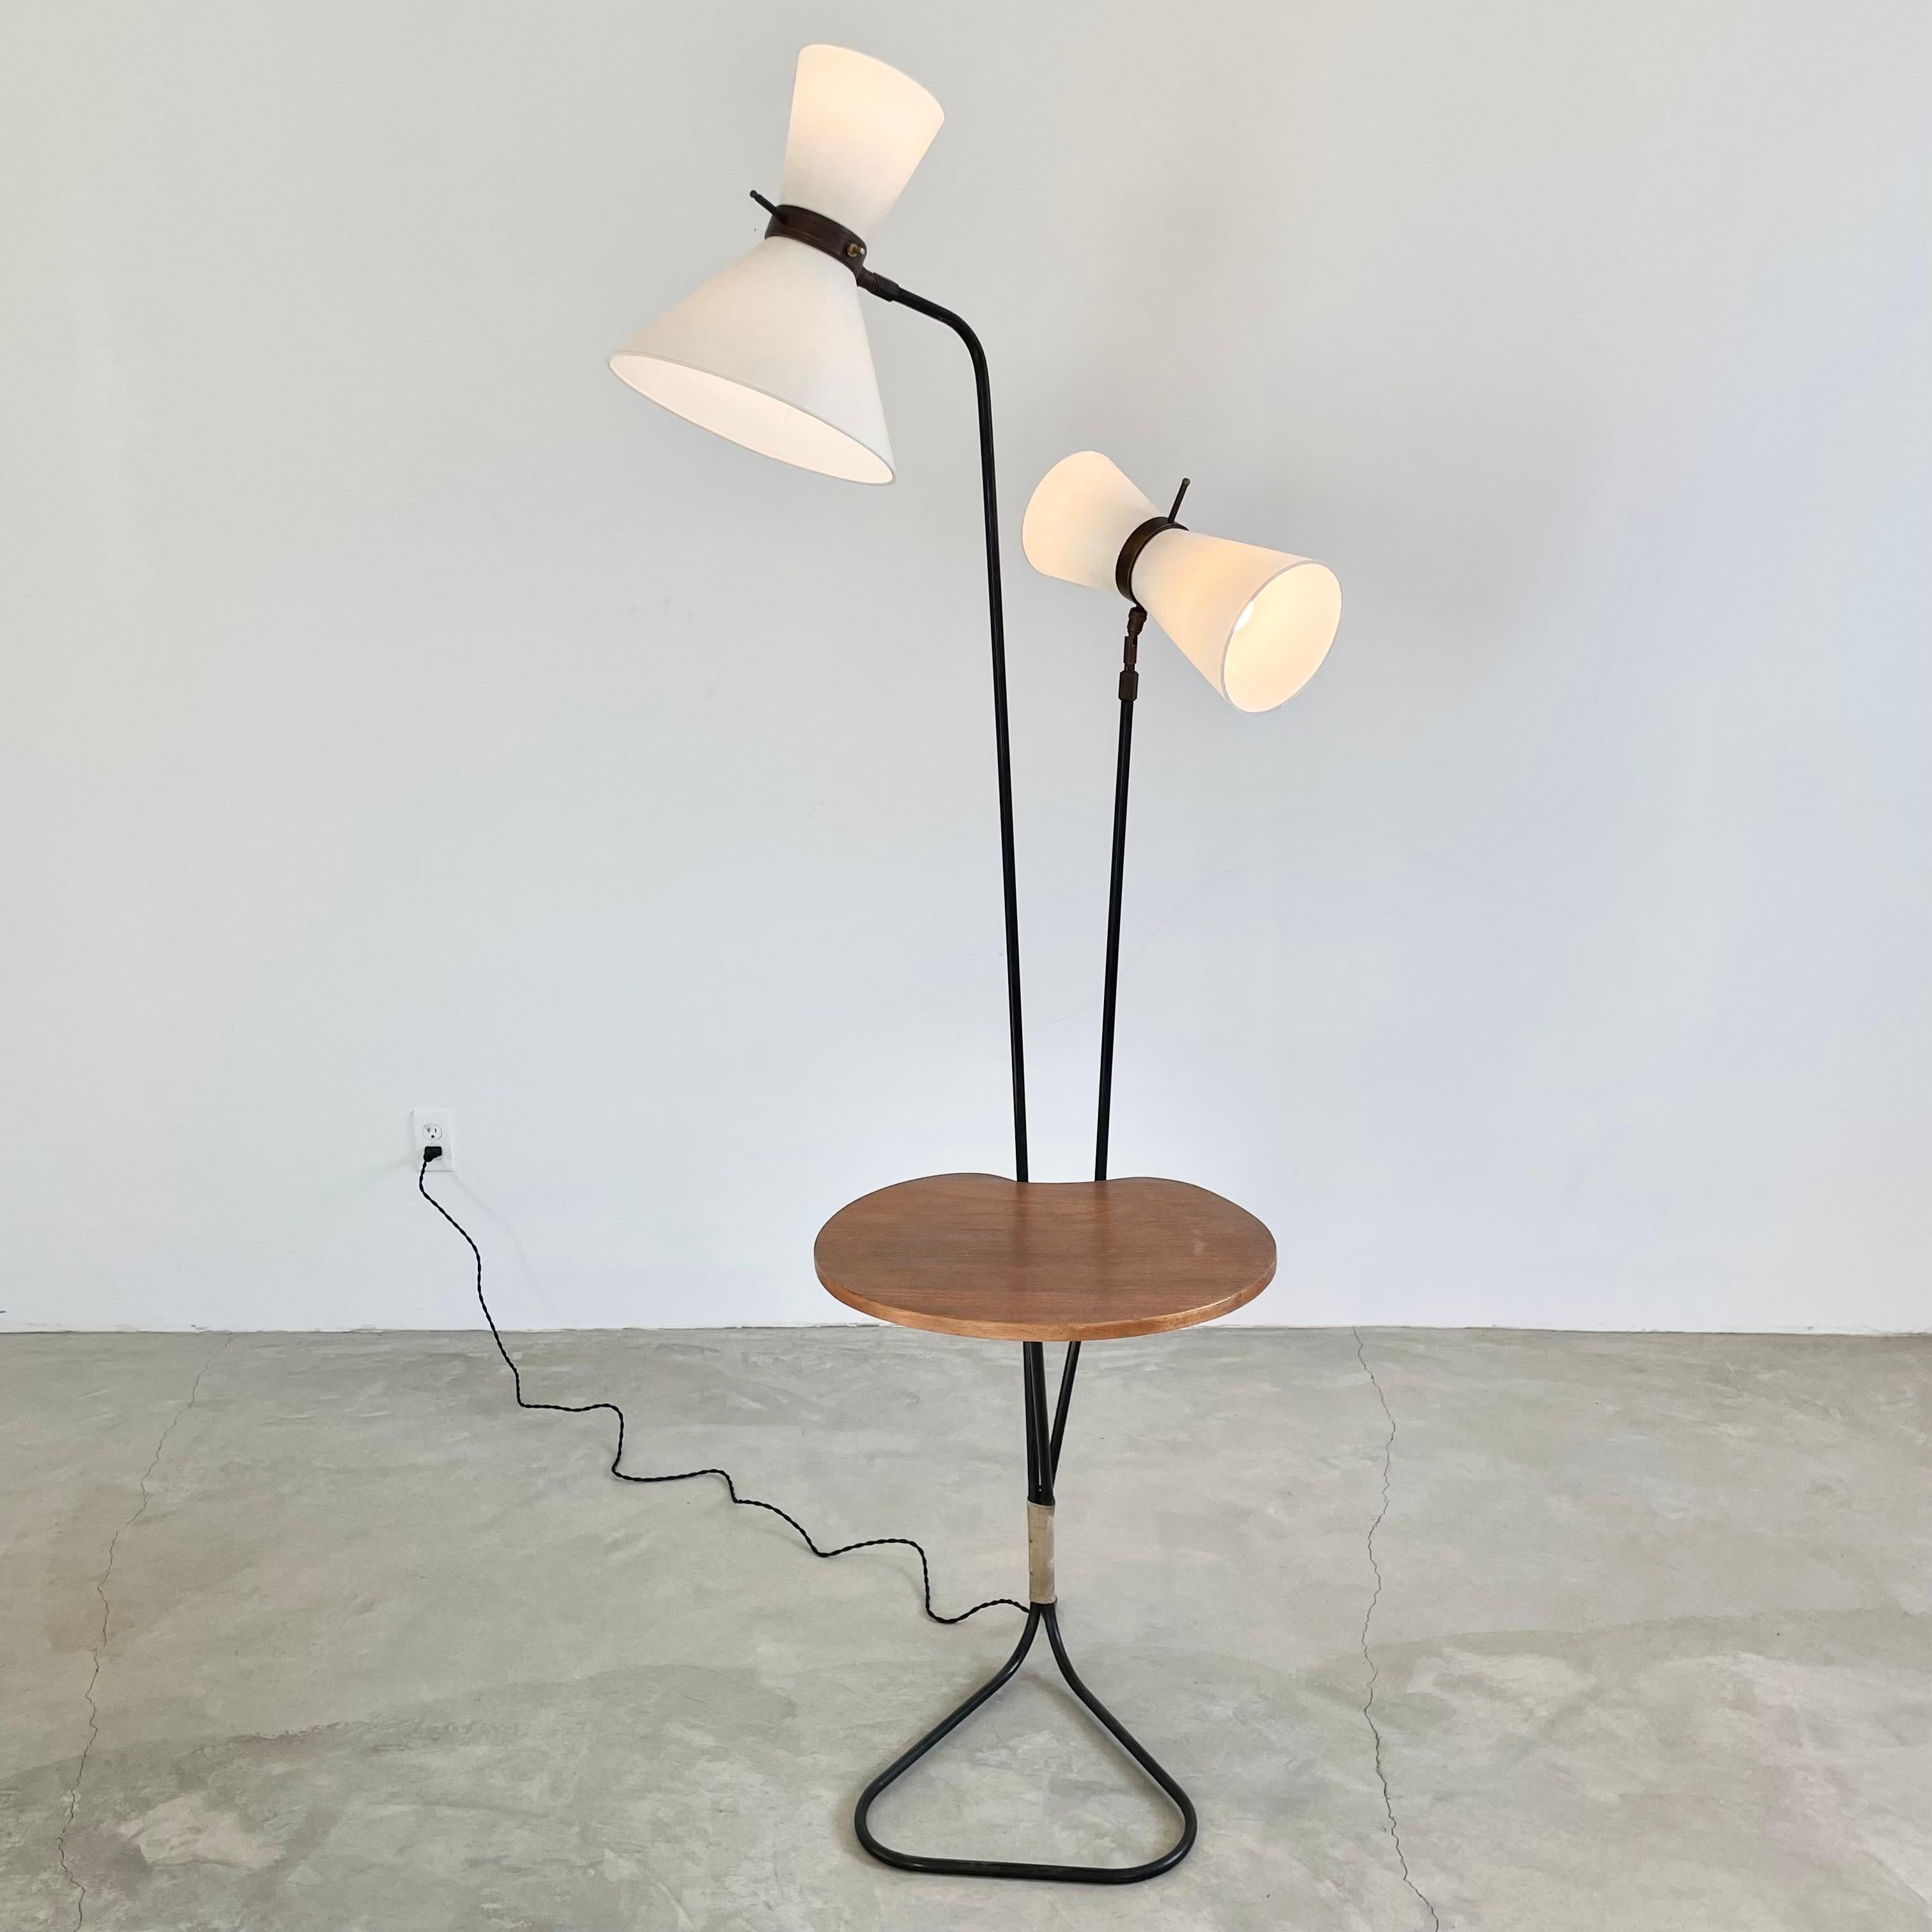 Double Headed Articulating Floor Lamp, 1950s France For Sale 1